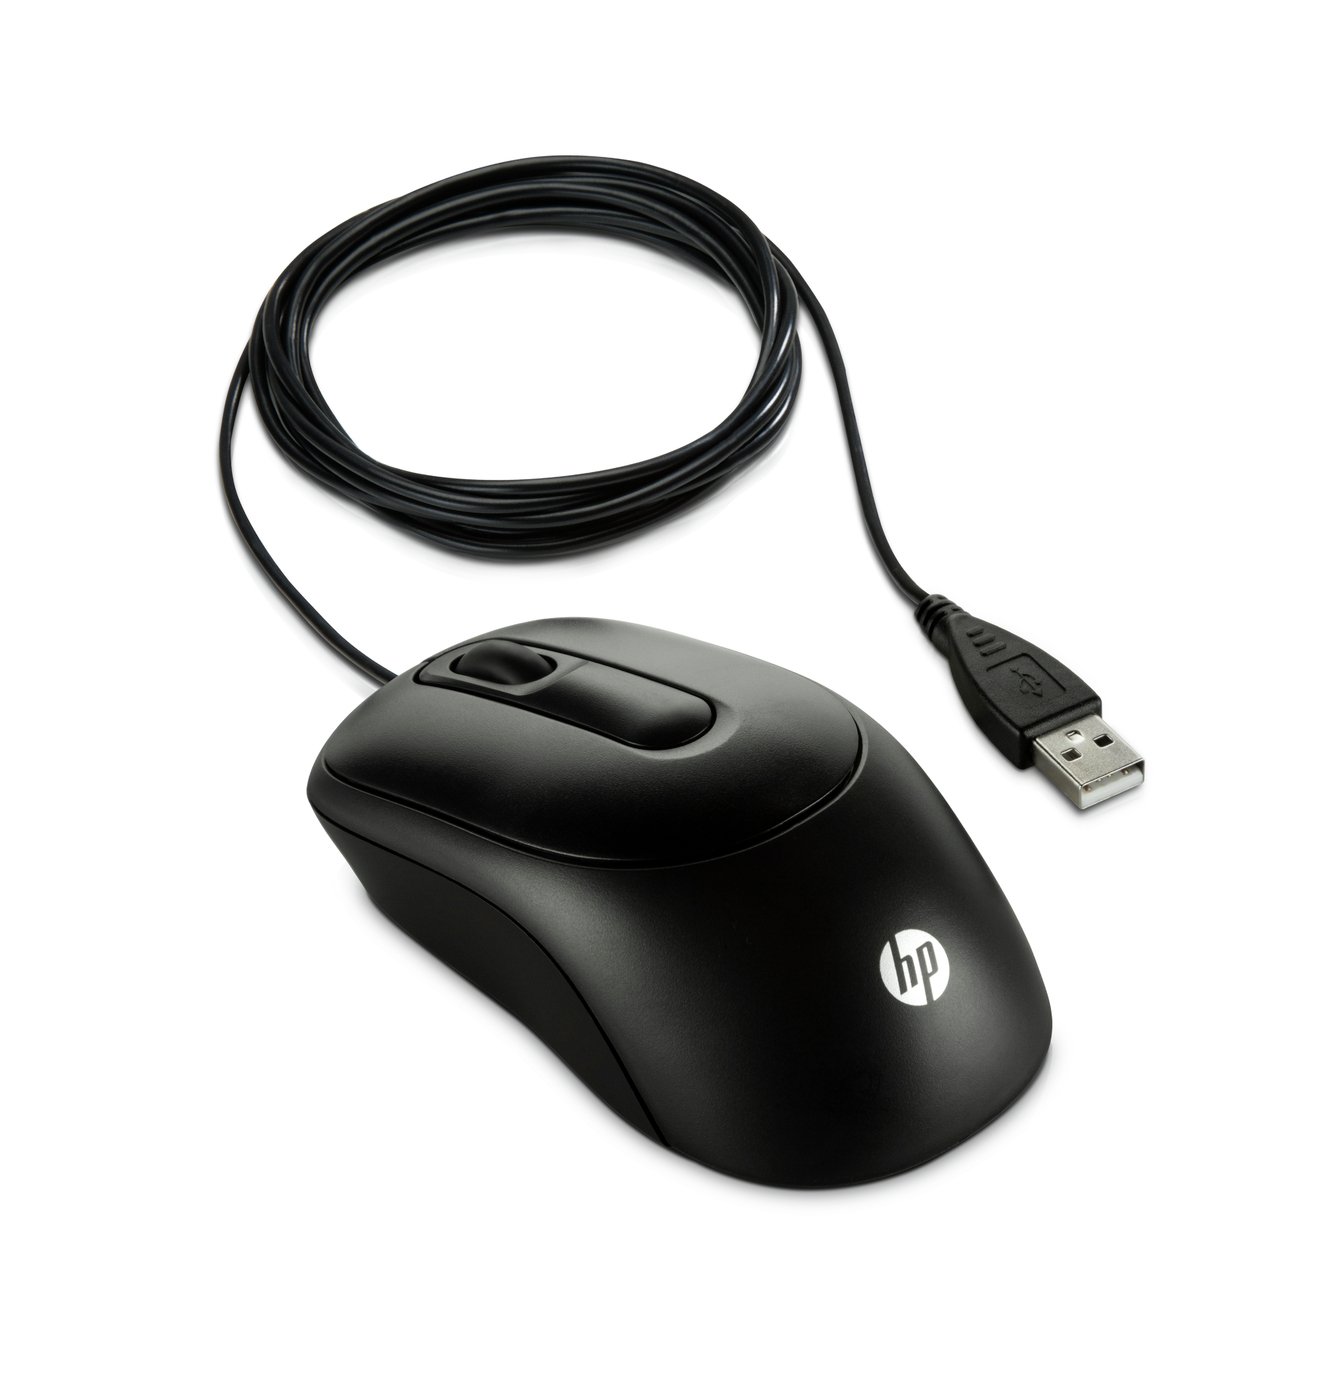 HP X900 Wired Mouse review